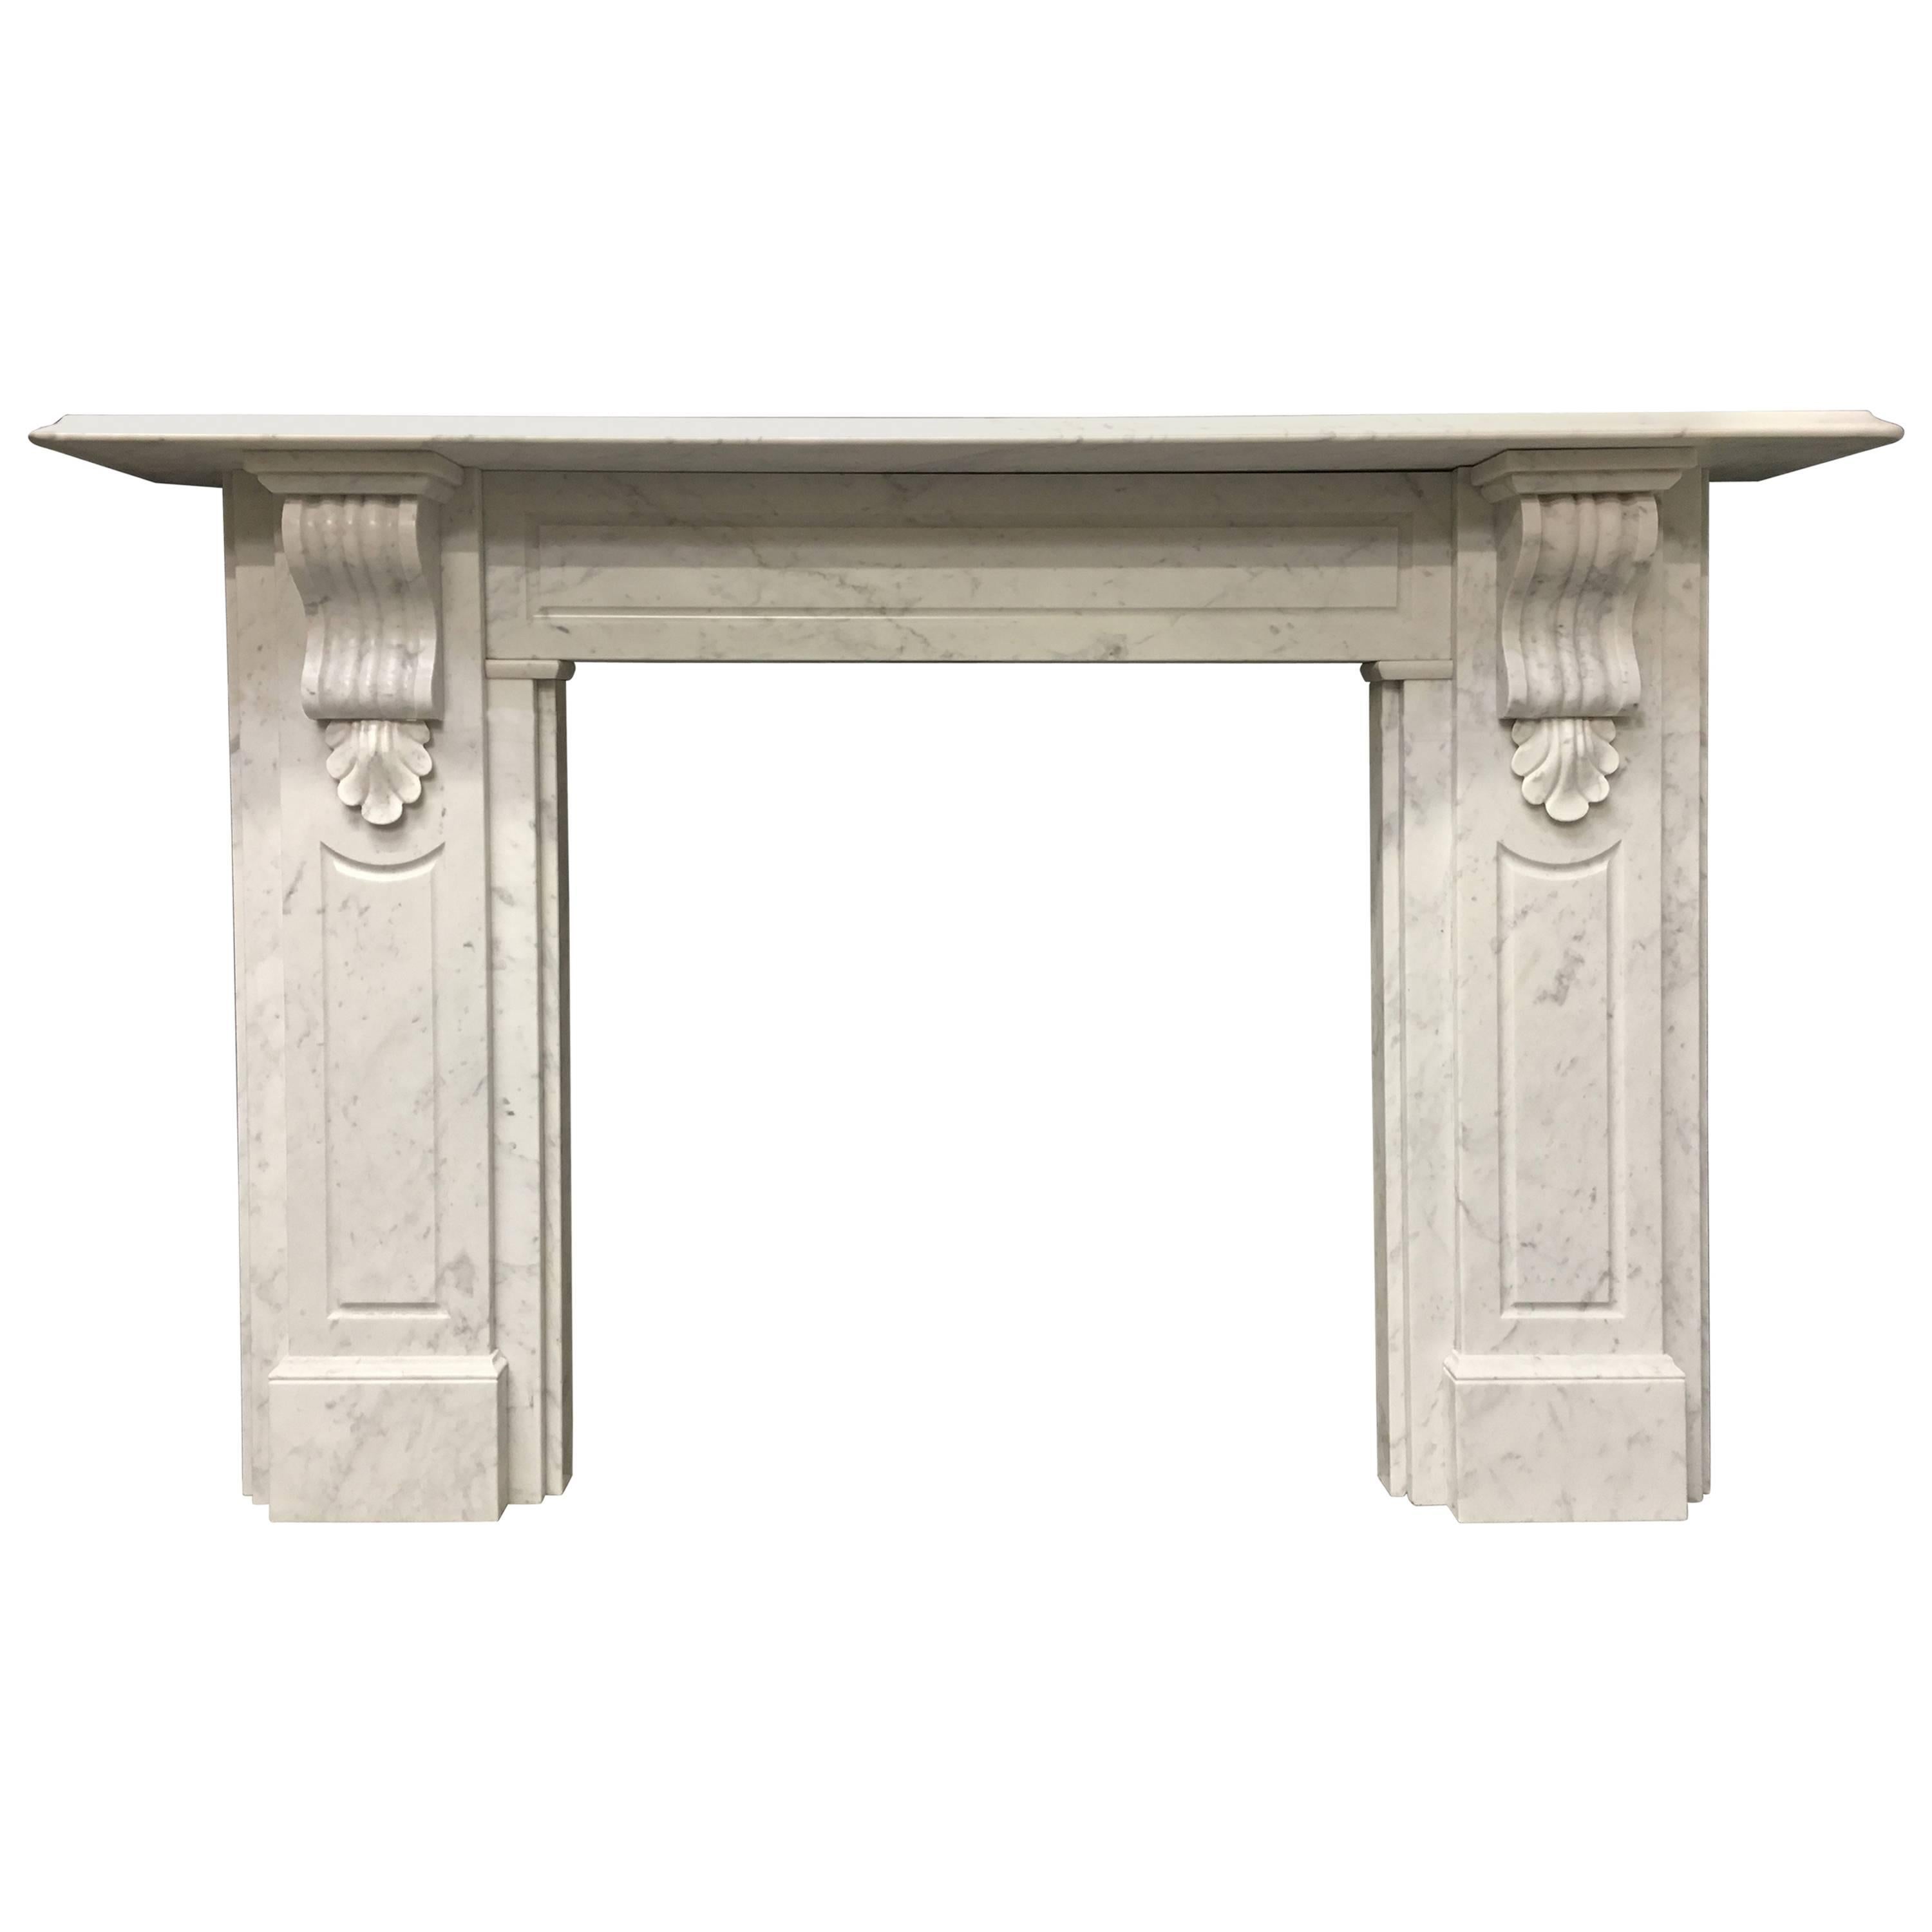 Large Period Marble Fireplace Surround